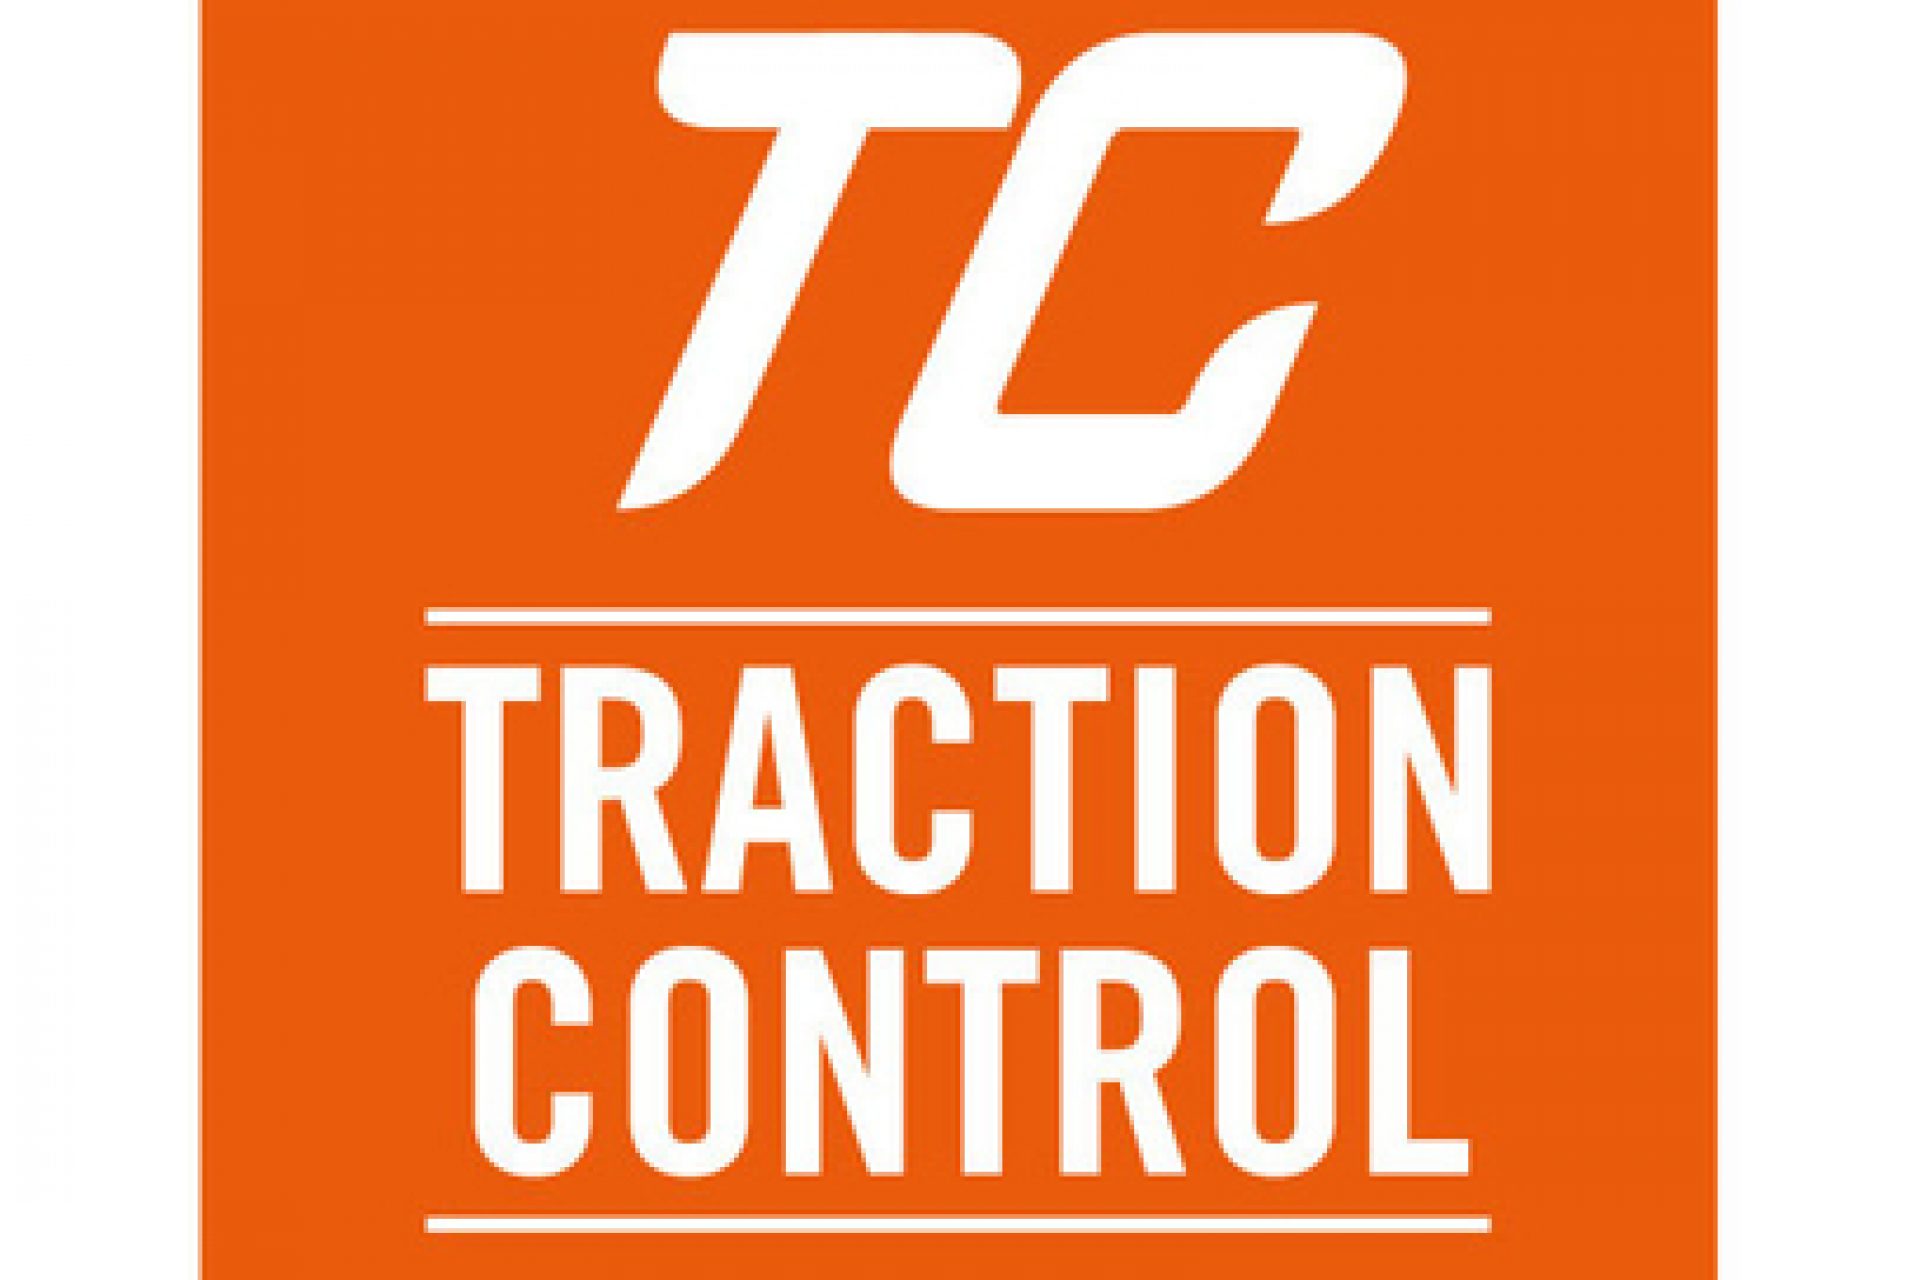 TRACTION CONTROL